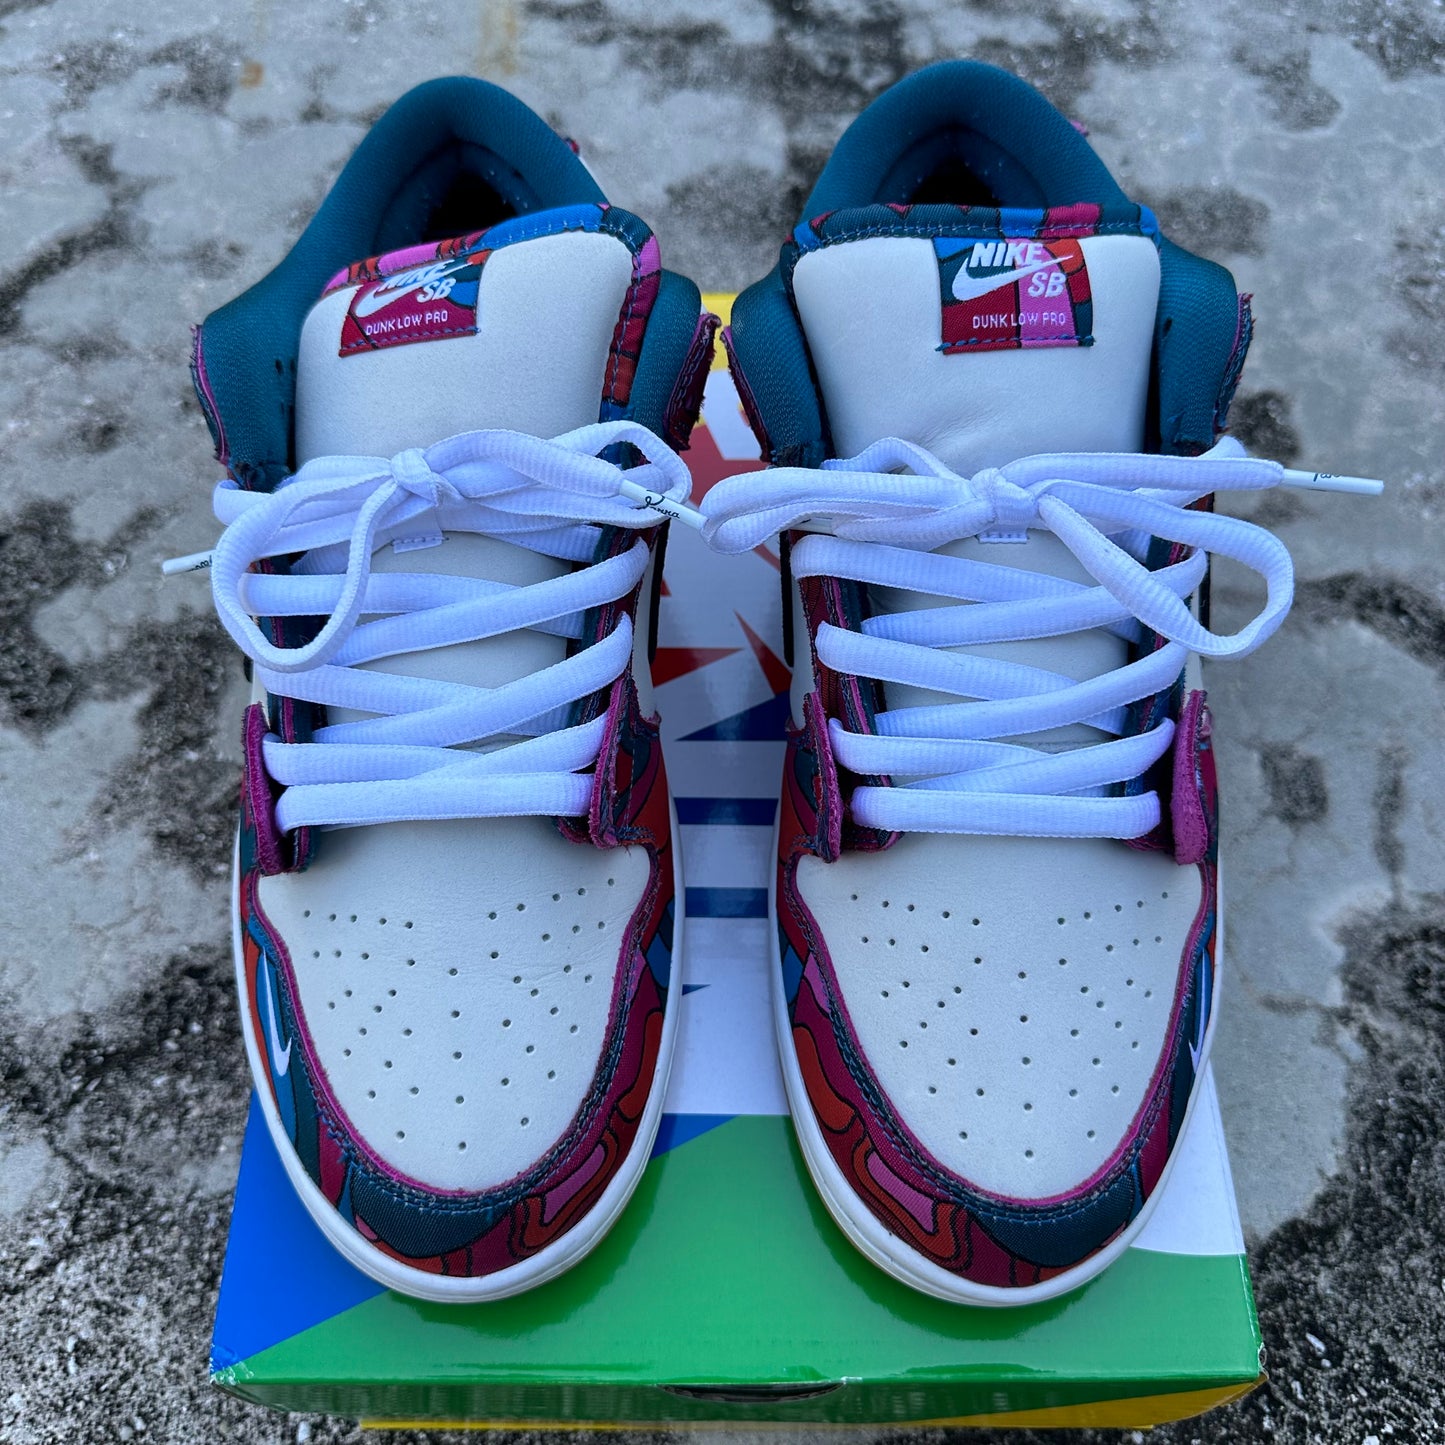 Nike Dunk SB Parra Abstract Art Size 11.5 DH7695-600